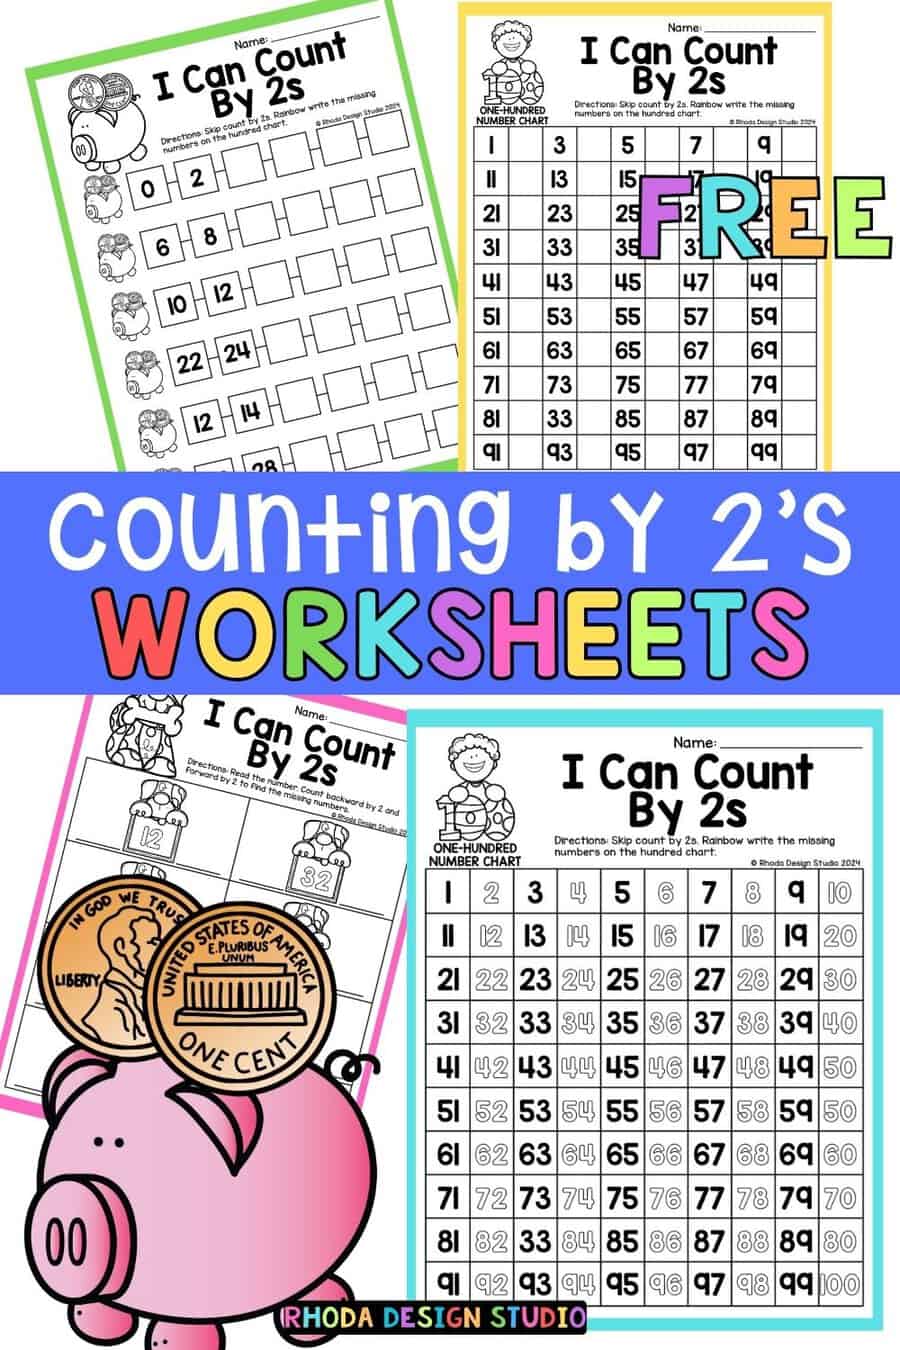 A printable counting by 2’s worksheet for kindergarten, preschool, and first graders. Students or kids will practice and improve their counting abilities with this worksheet. This counting by 2’s worksheet is in pdf format and downloadable.